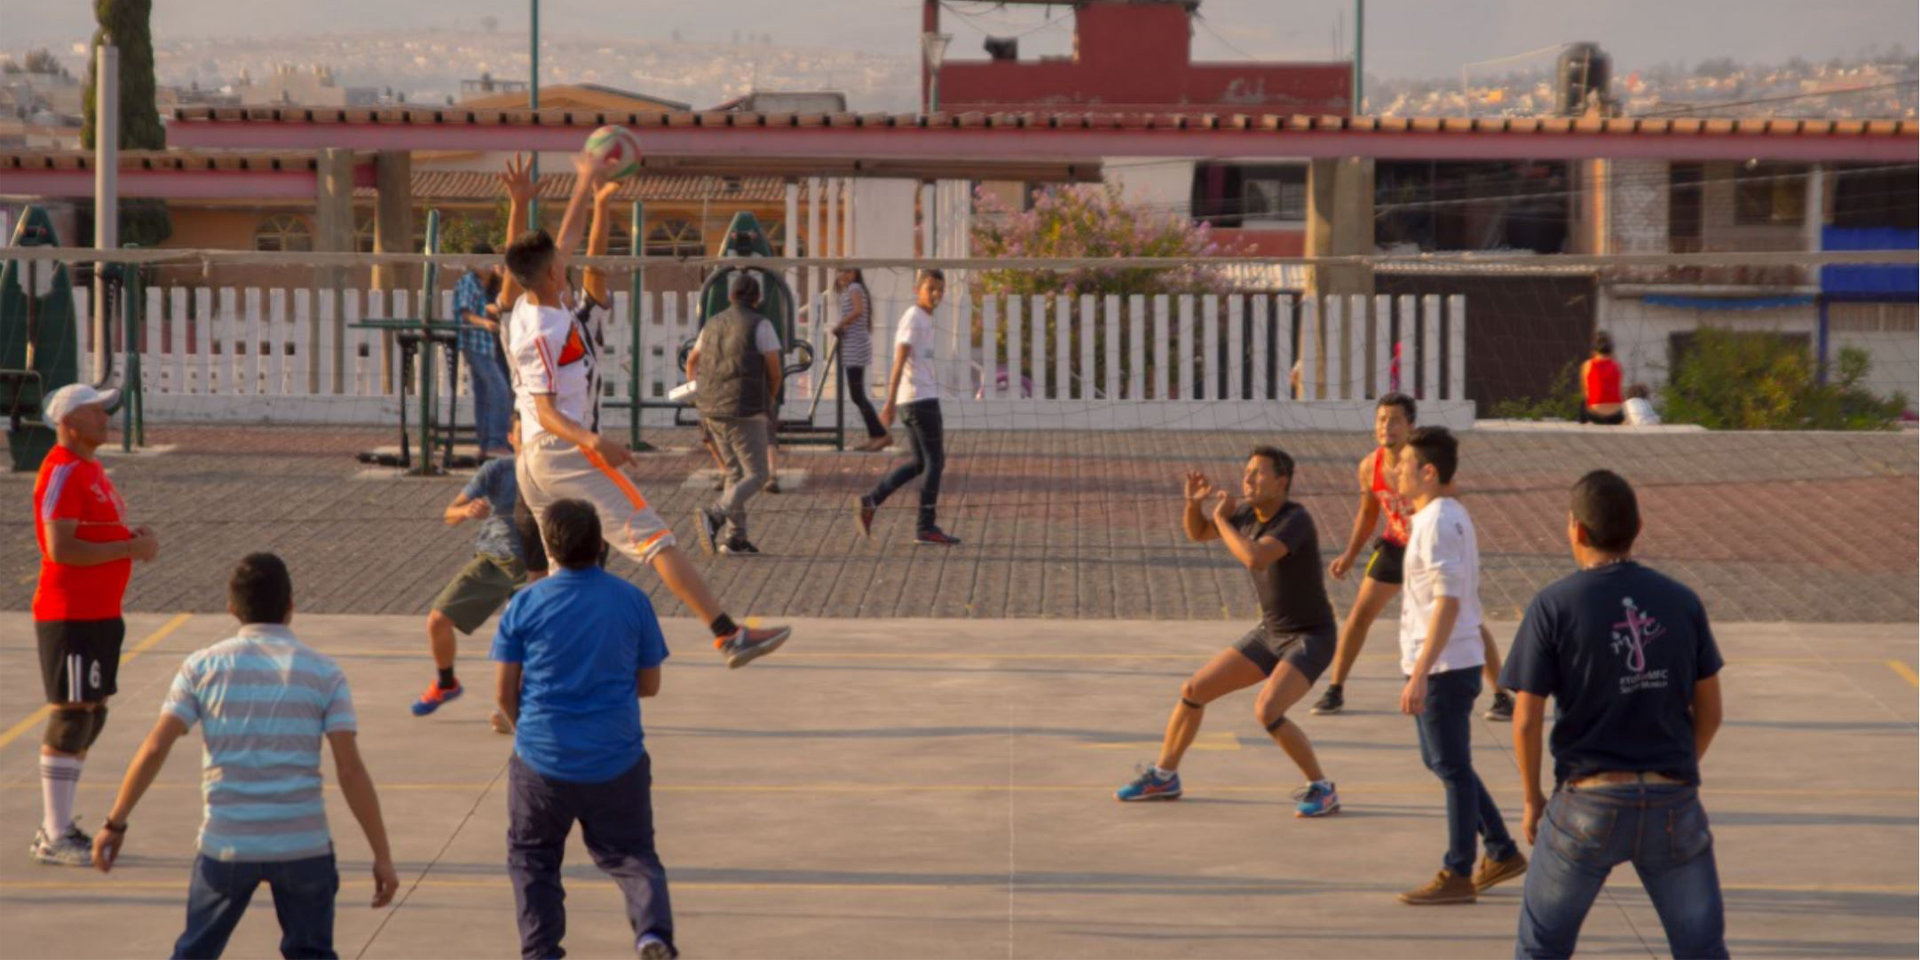 Several young adults playing volleyball on a concrete playing surface.